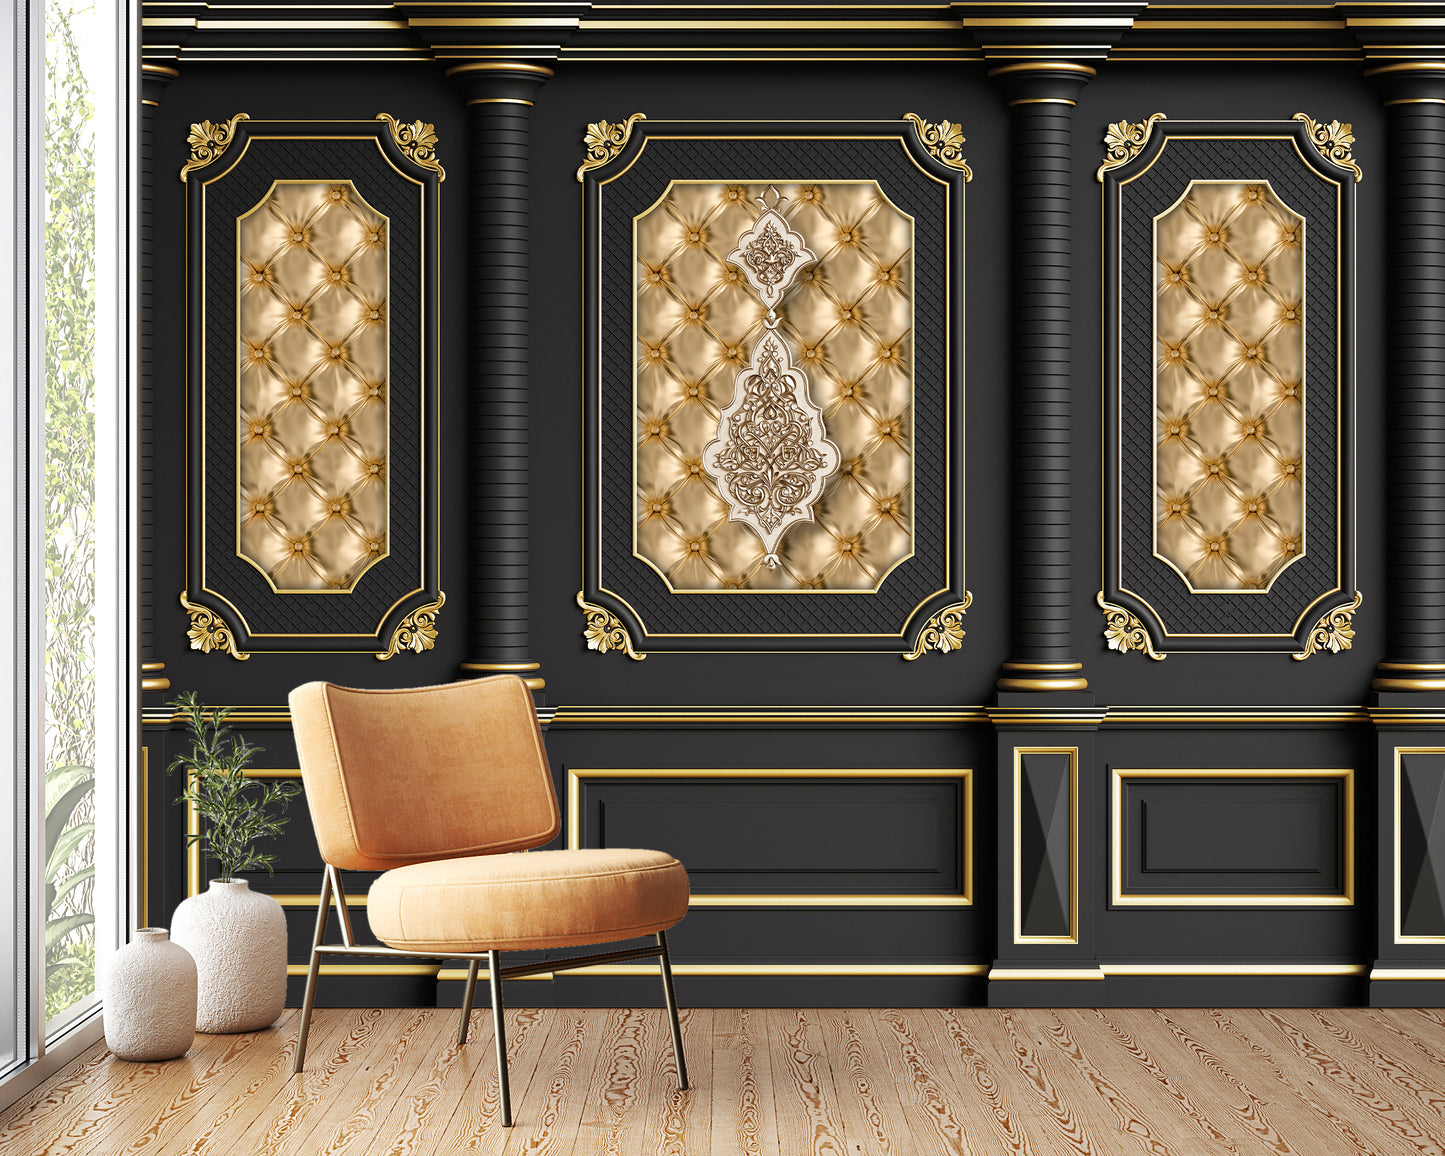 wallpaper 3d classic wall with gold black panels with gold designs